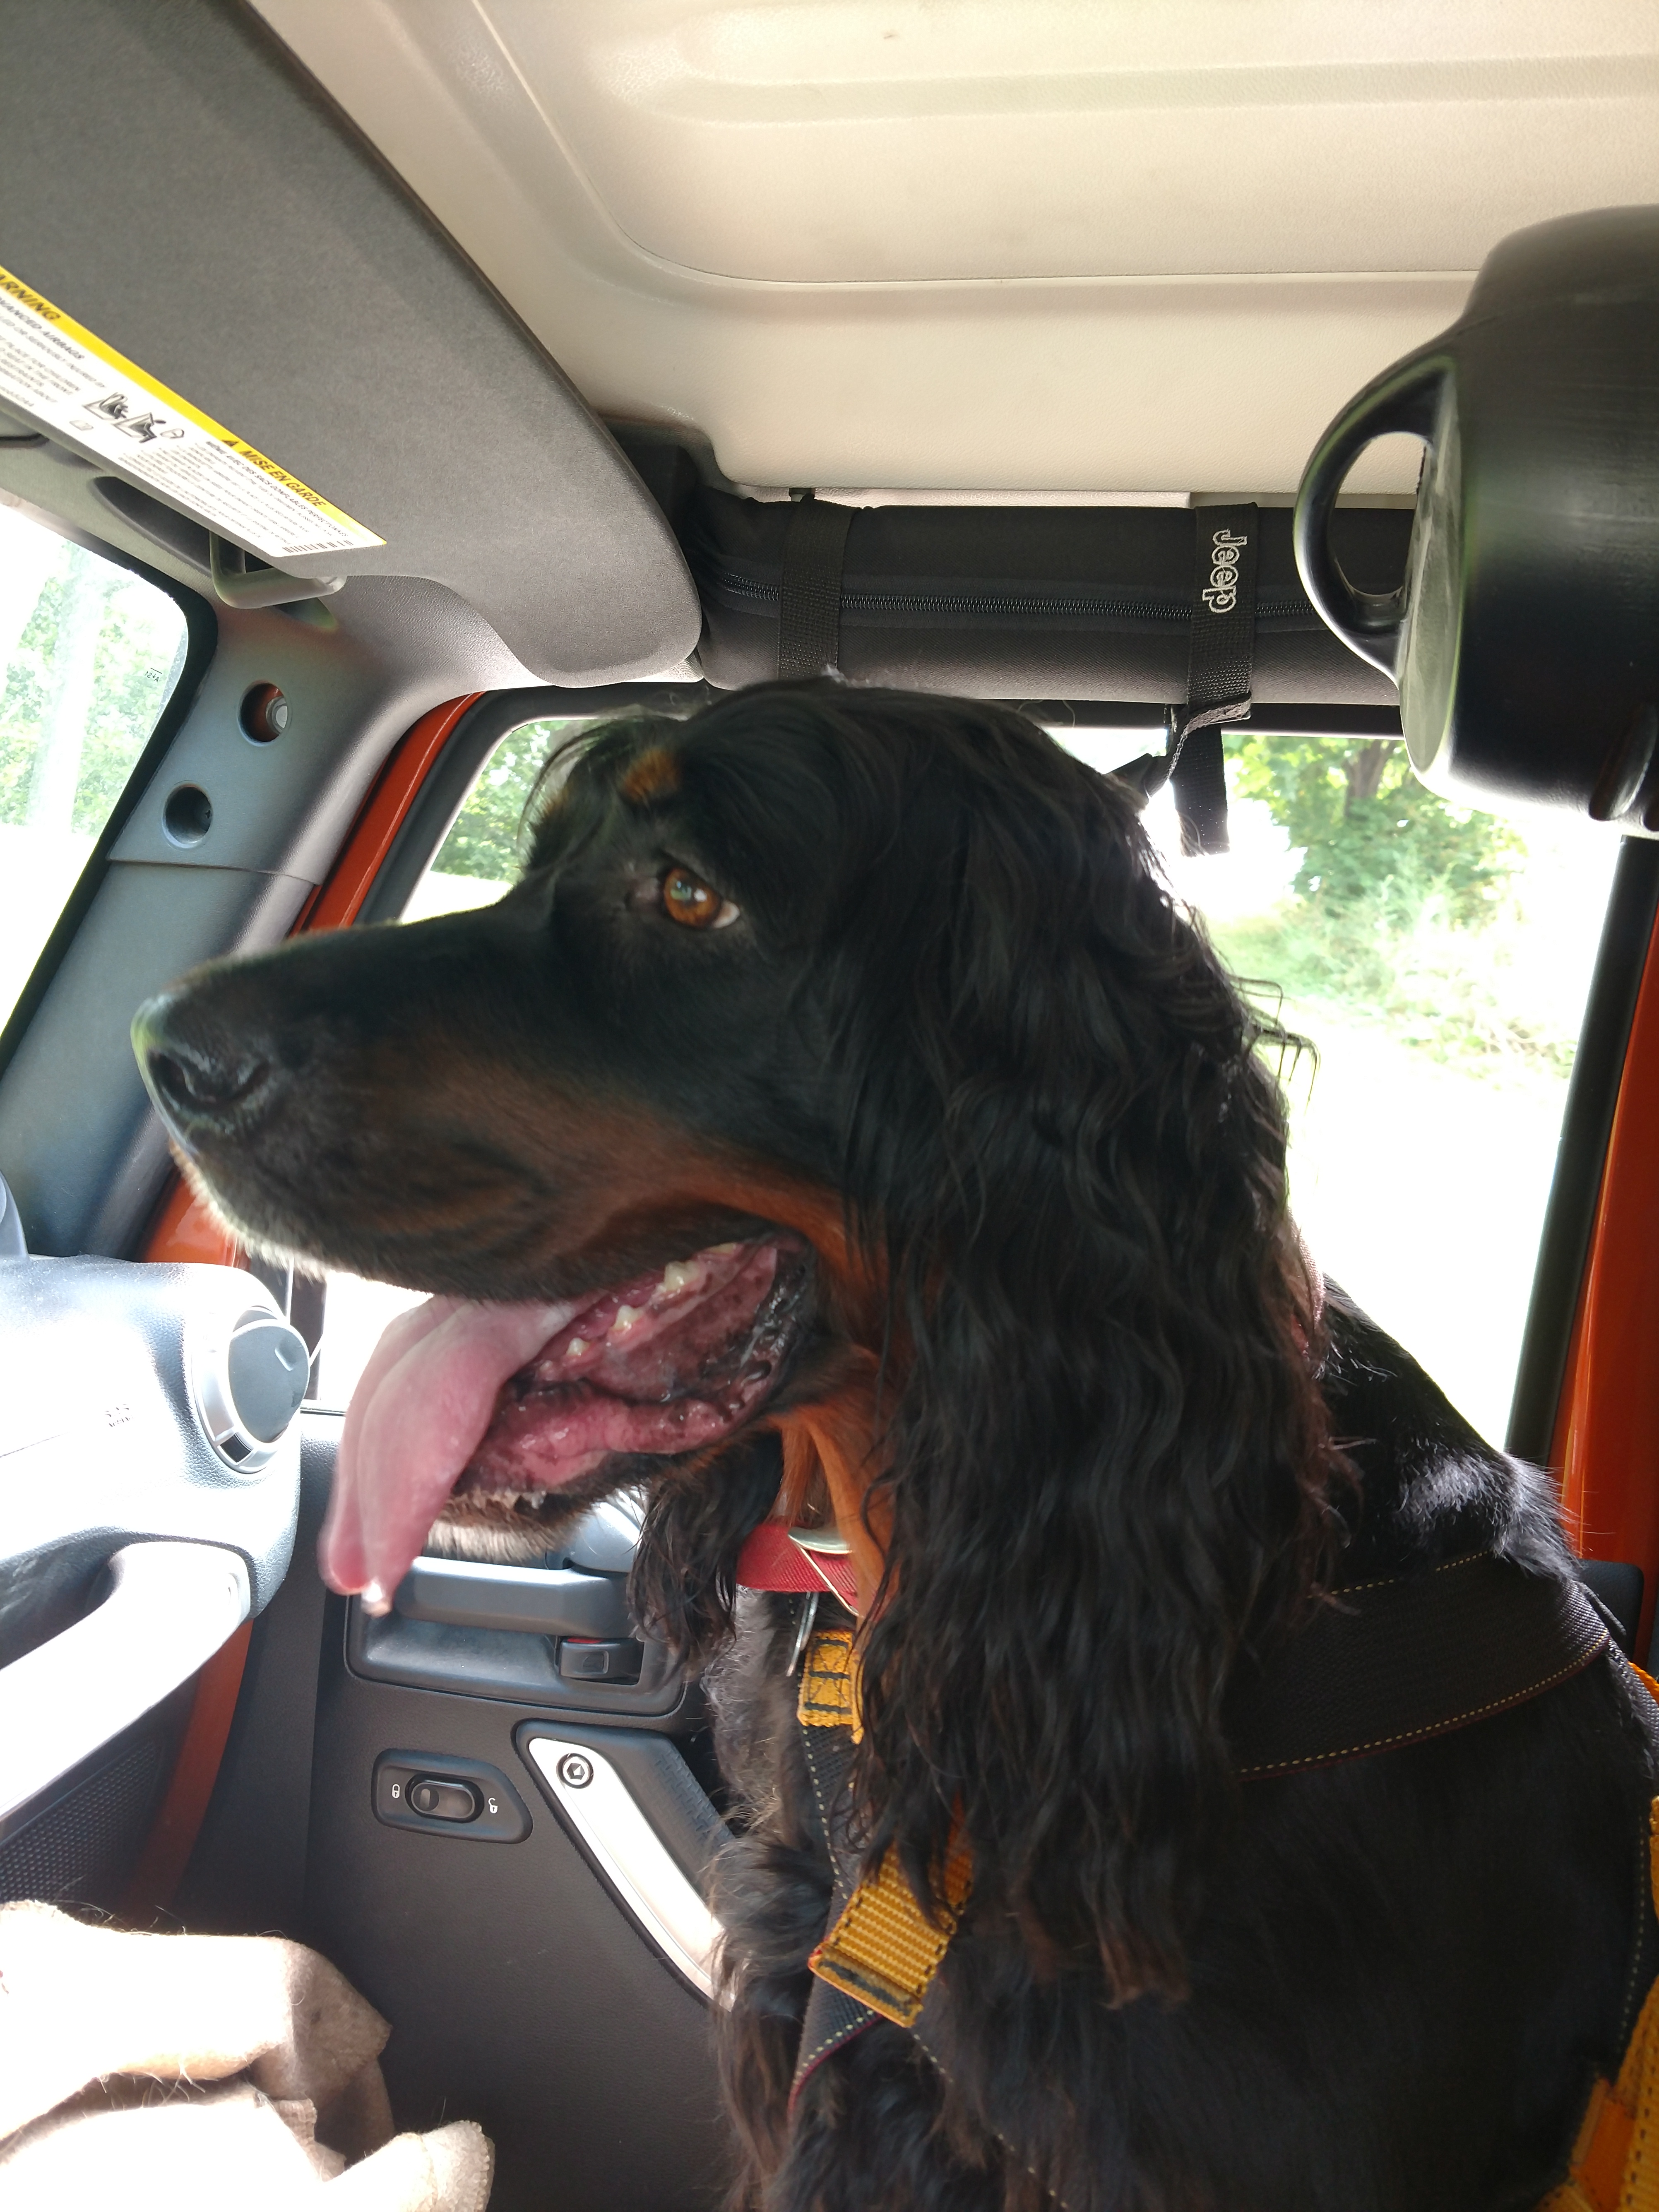 My setter riding shotgun in the Jeep.